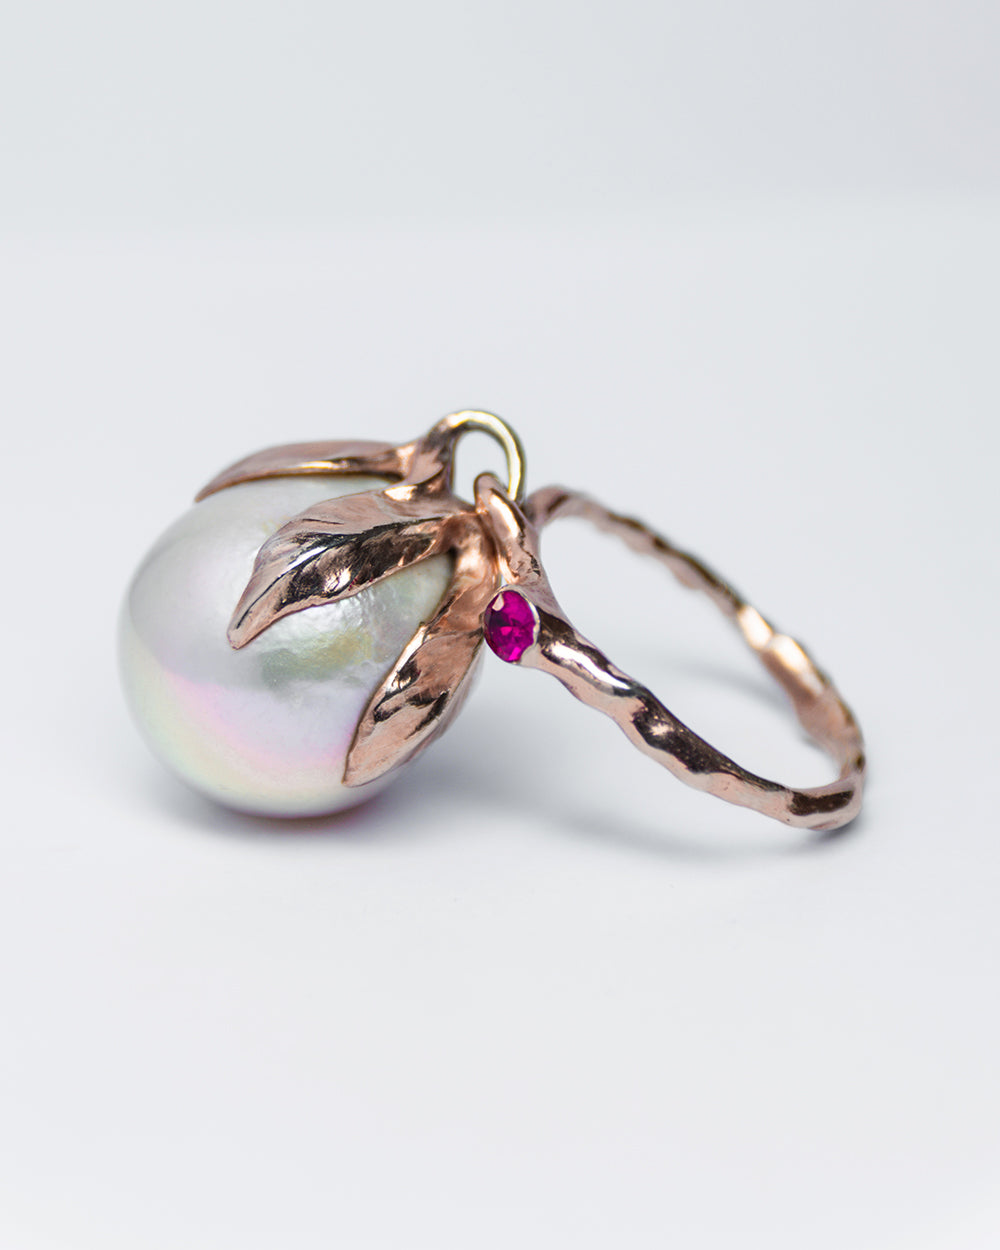 Kinetic design makes this Kara Ring a statement piece